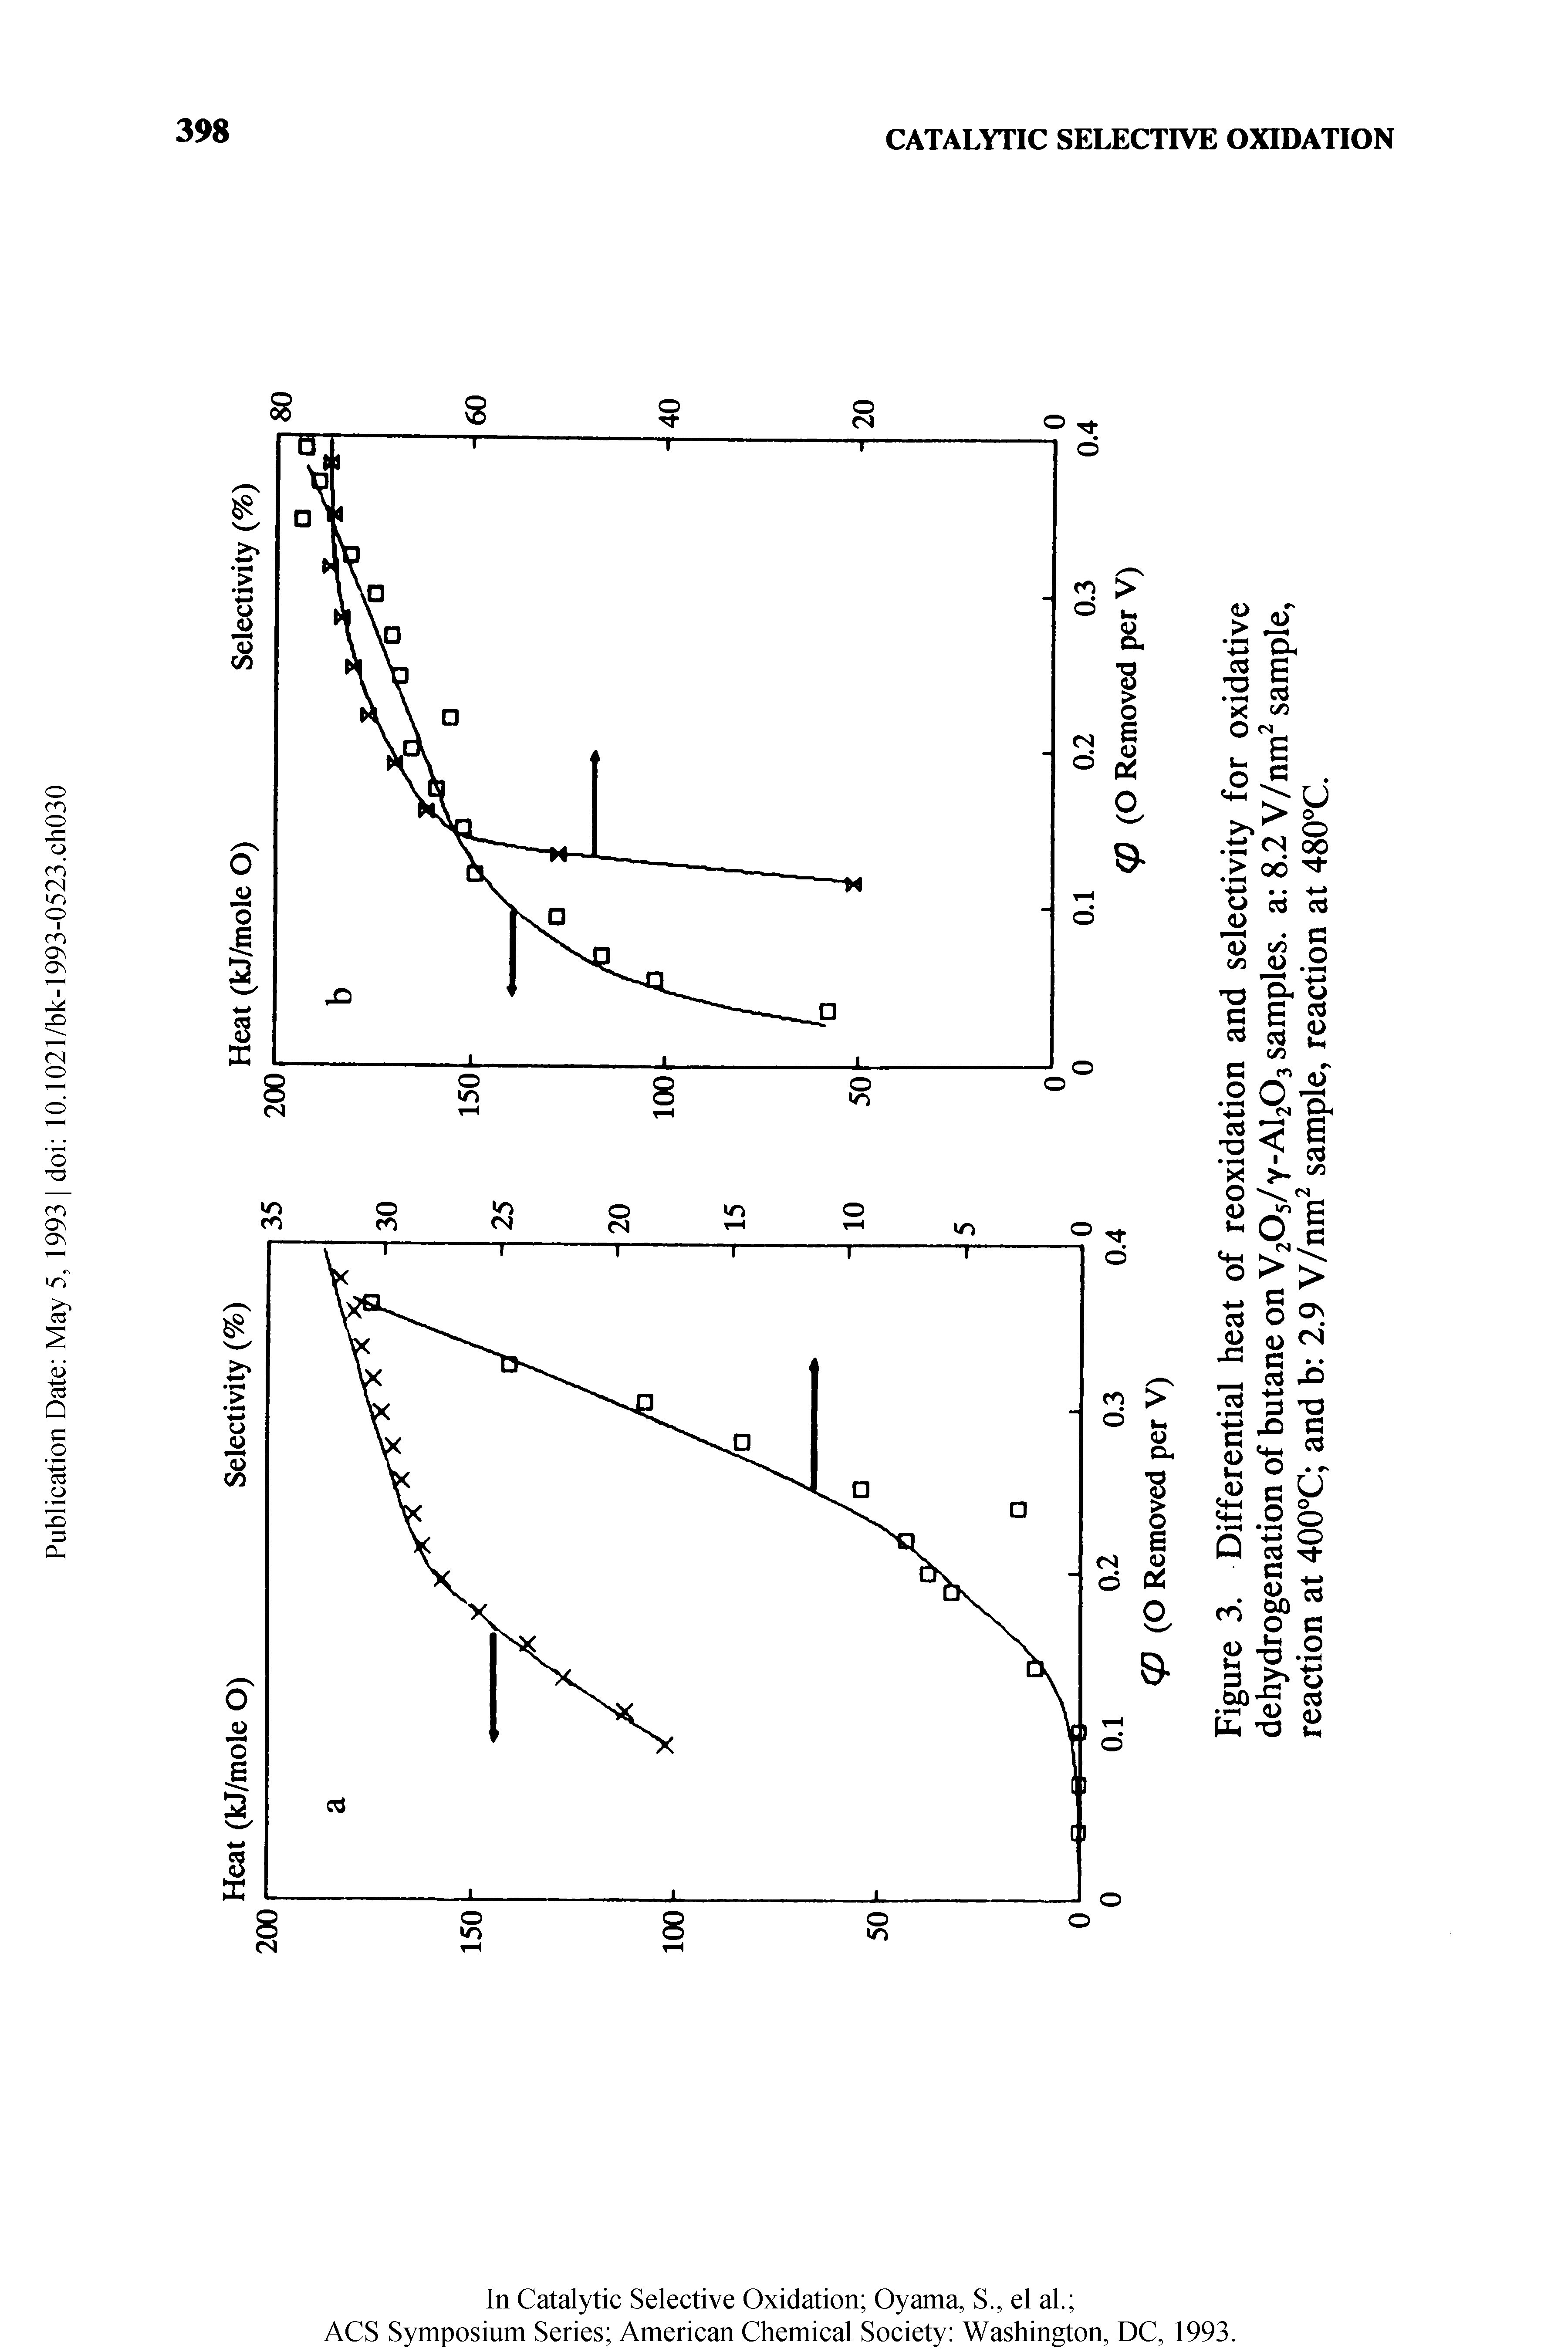 Figure 3. Differential heat of reoxidation and selectivity for oxidative dehydrogenation of butane on V2O5/Y-AI2O3 samples, a 8.2 V/nm sample, reaction at 400°C and b 2.9 V/nm sample, reaction at 480°C.